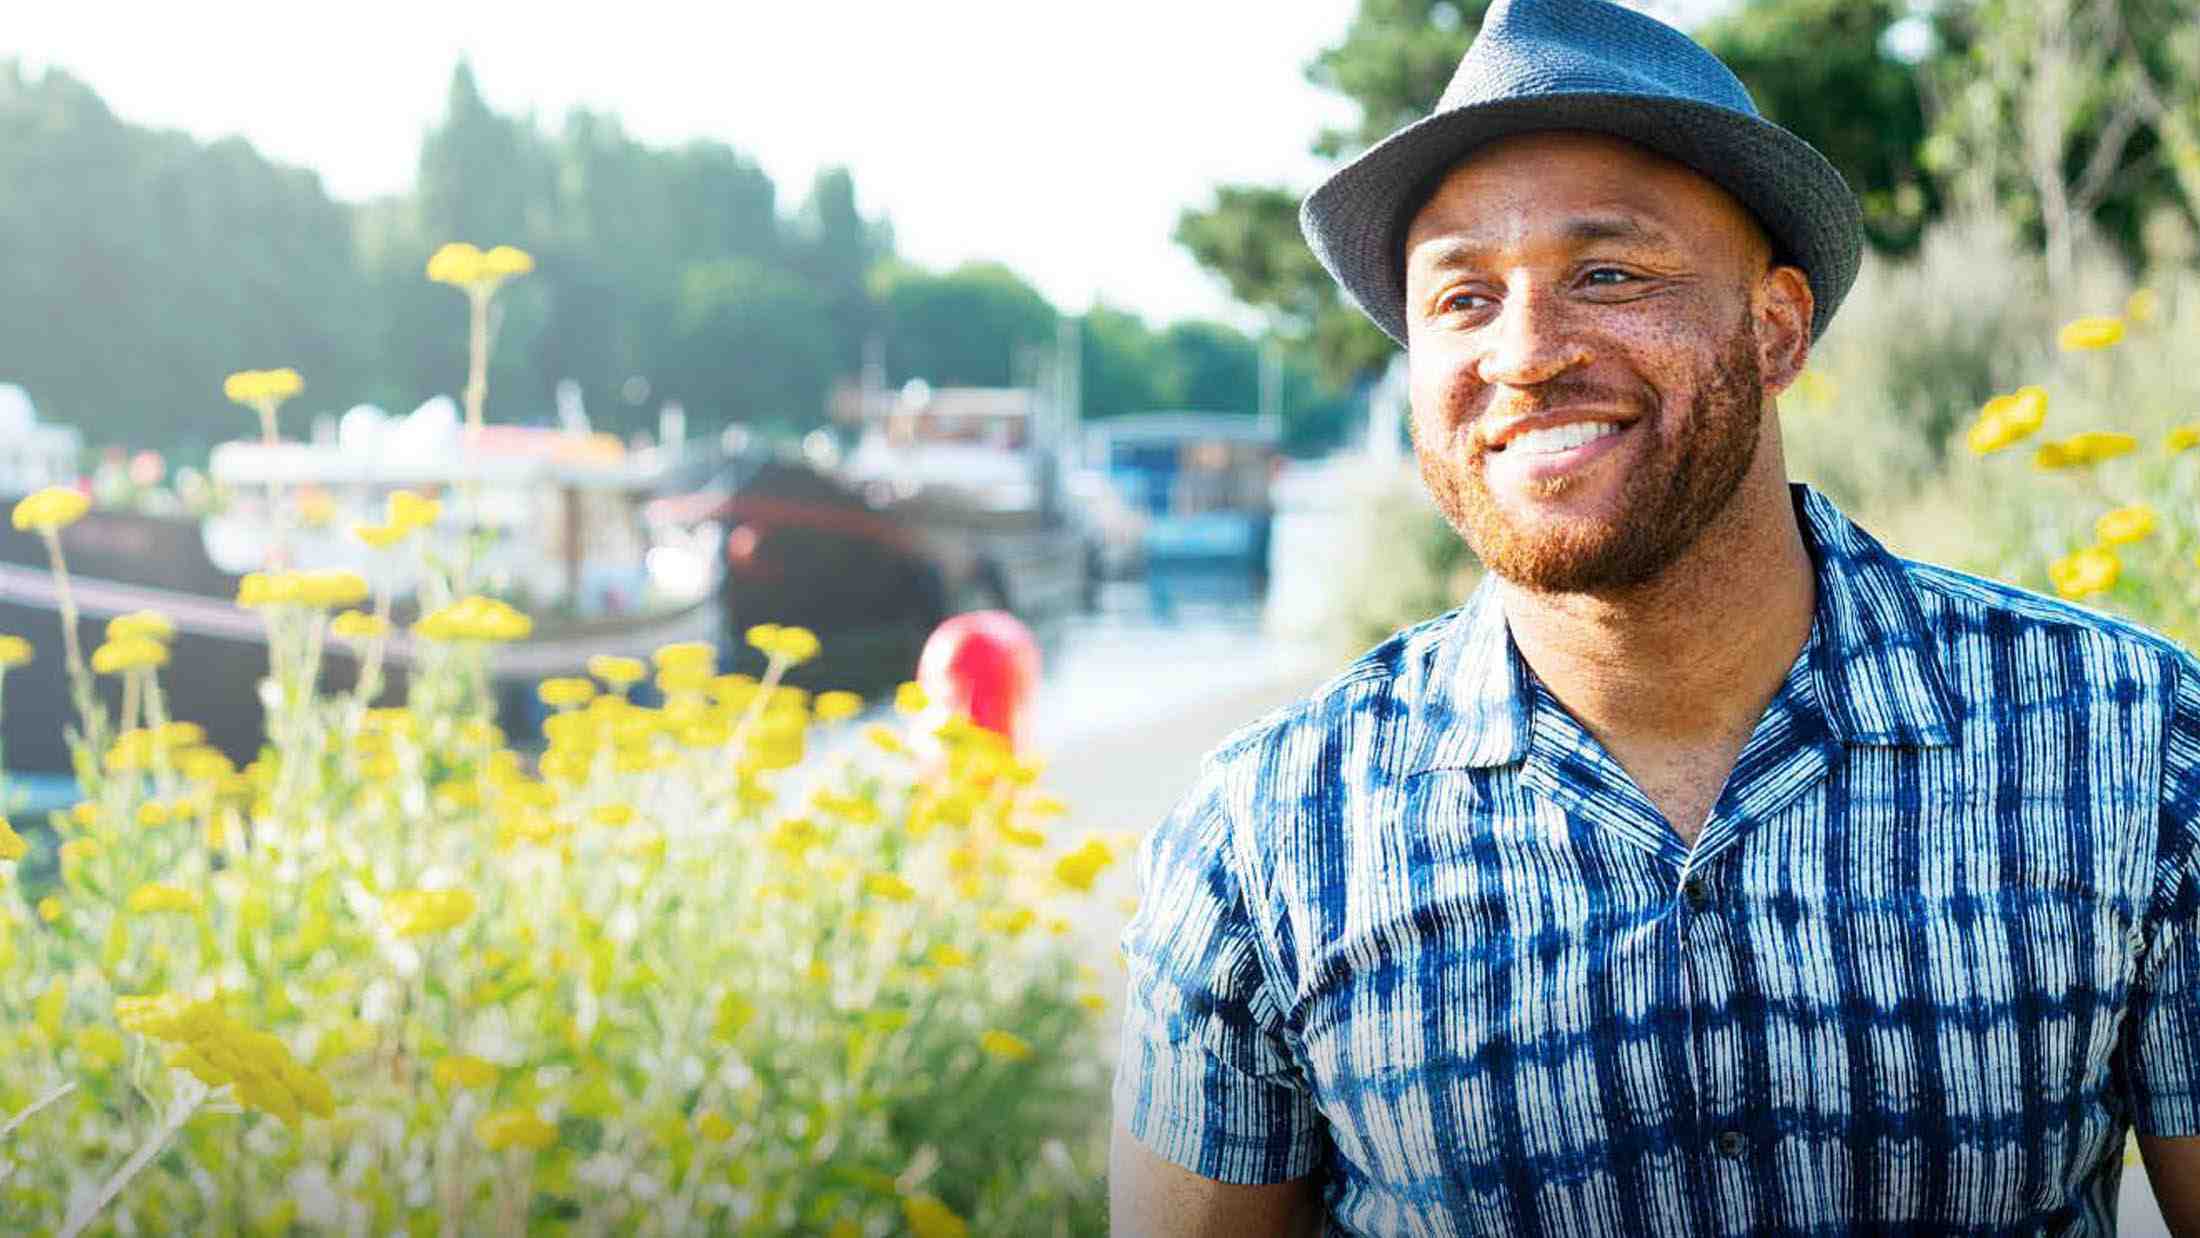 Man in a hat smiling next to a canal